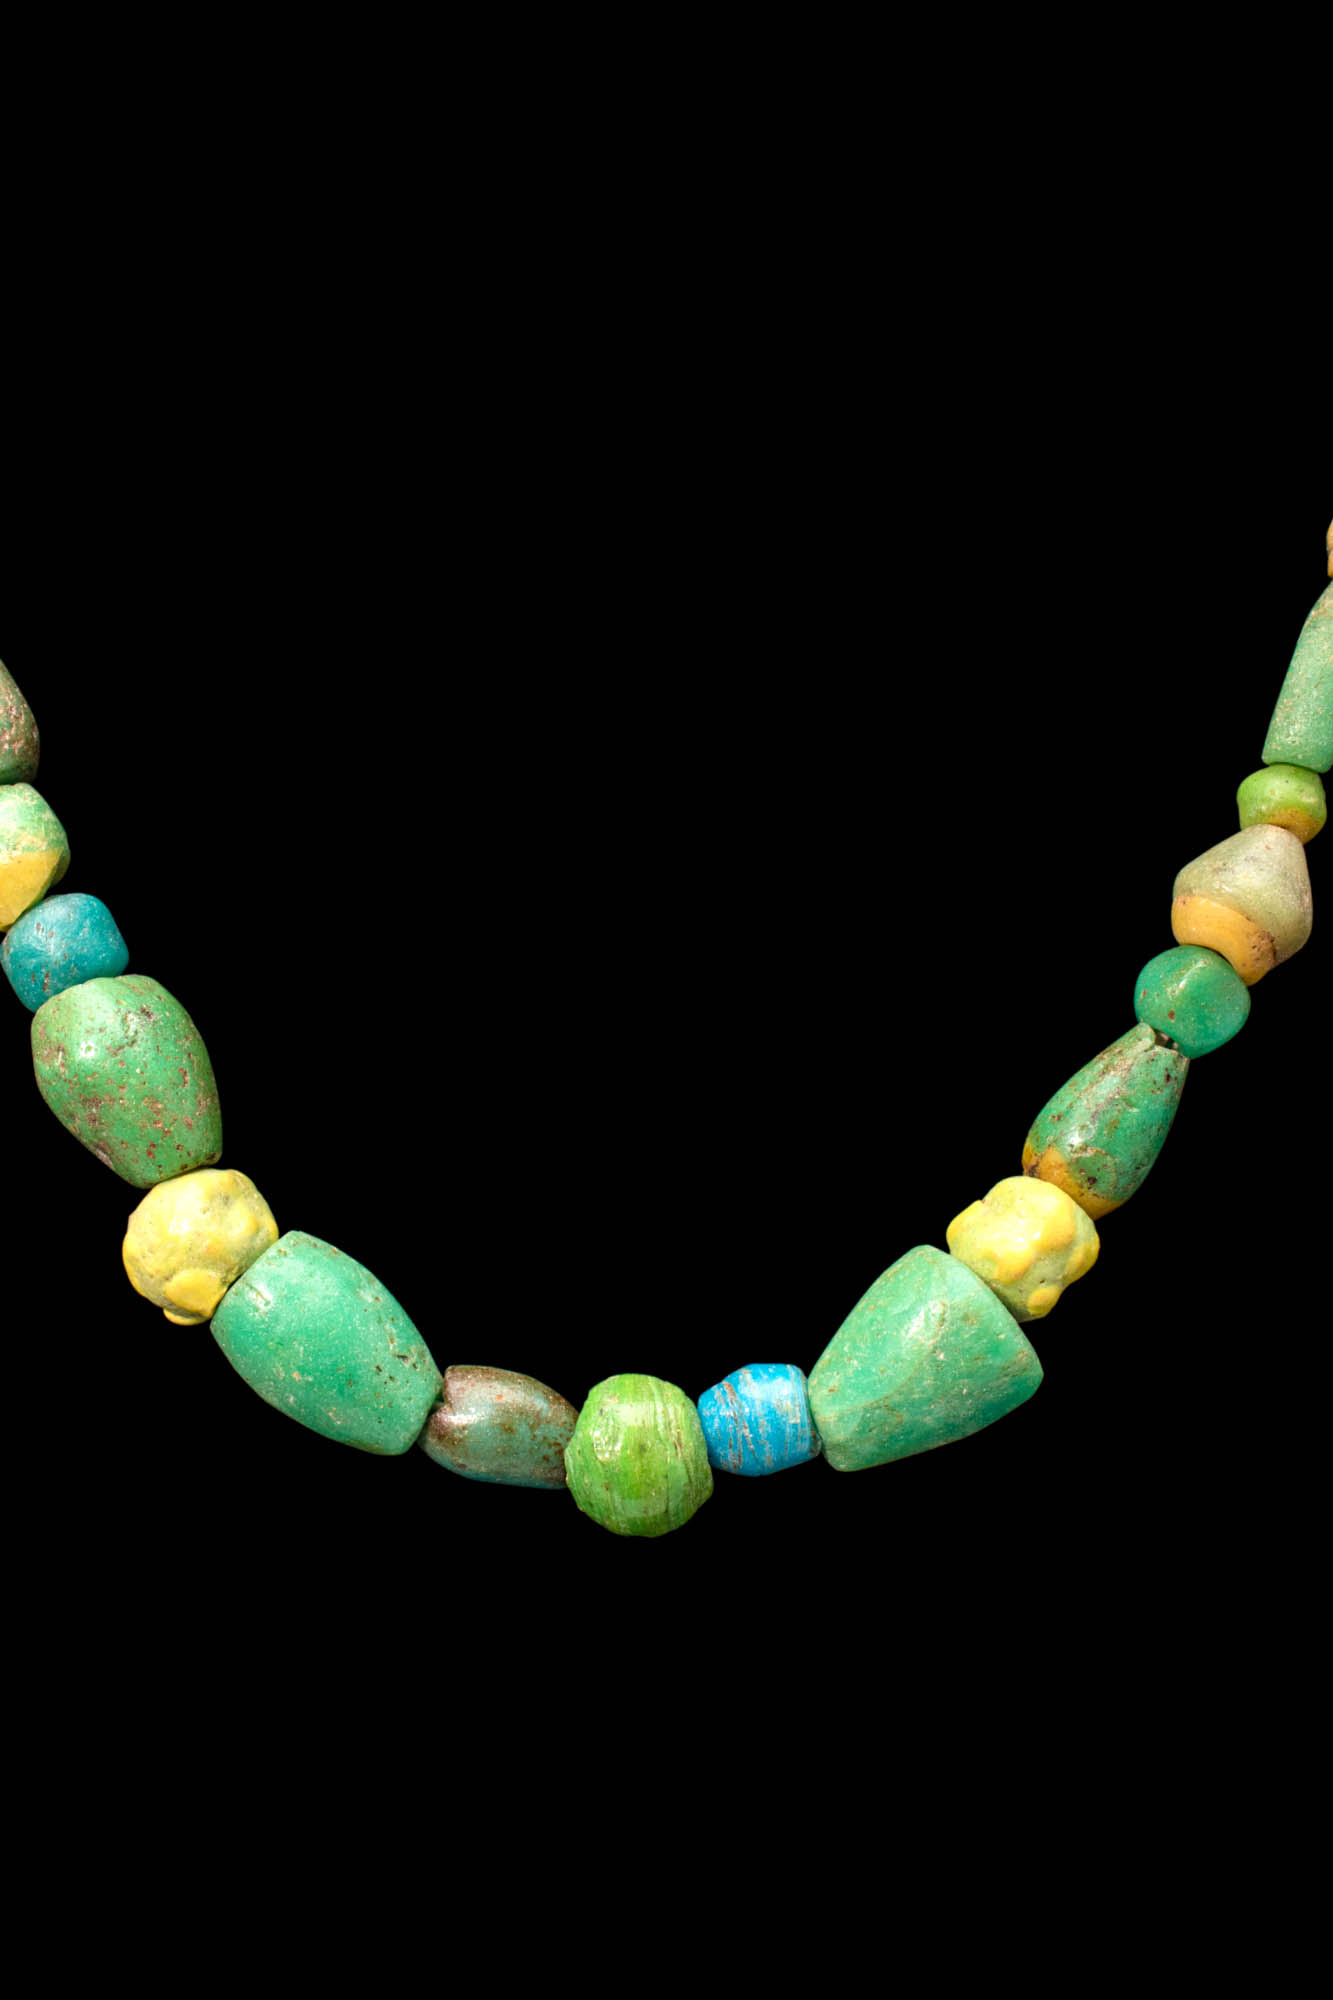 PHOENICIAN GLASS BEADS NECKLACE - Image 4 of 5